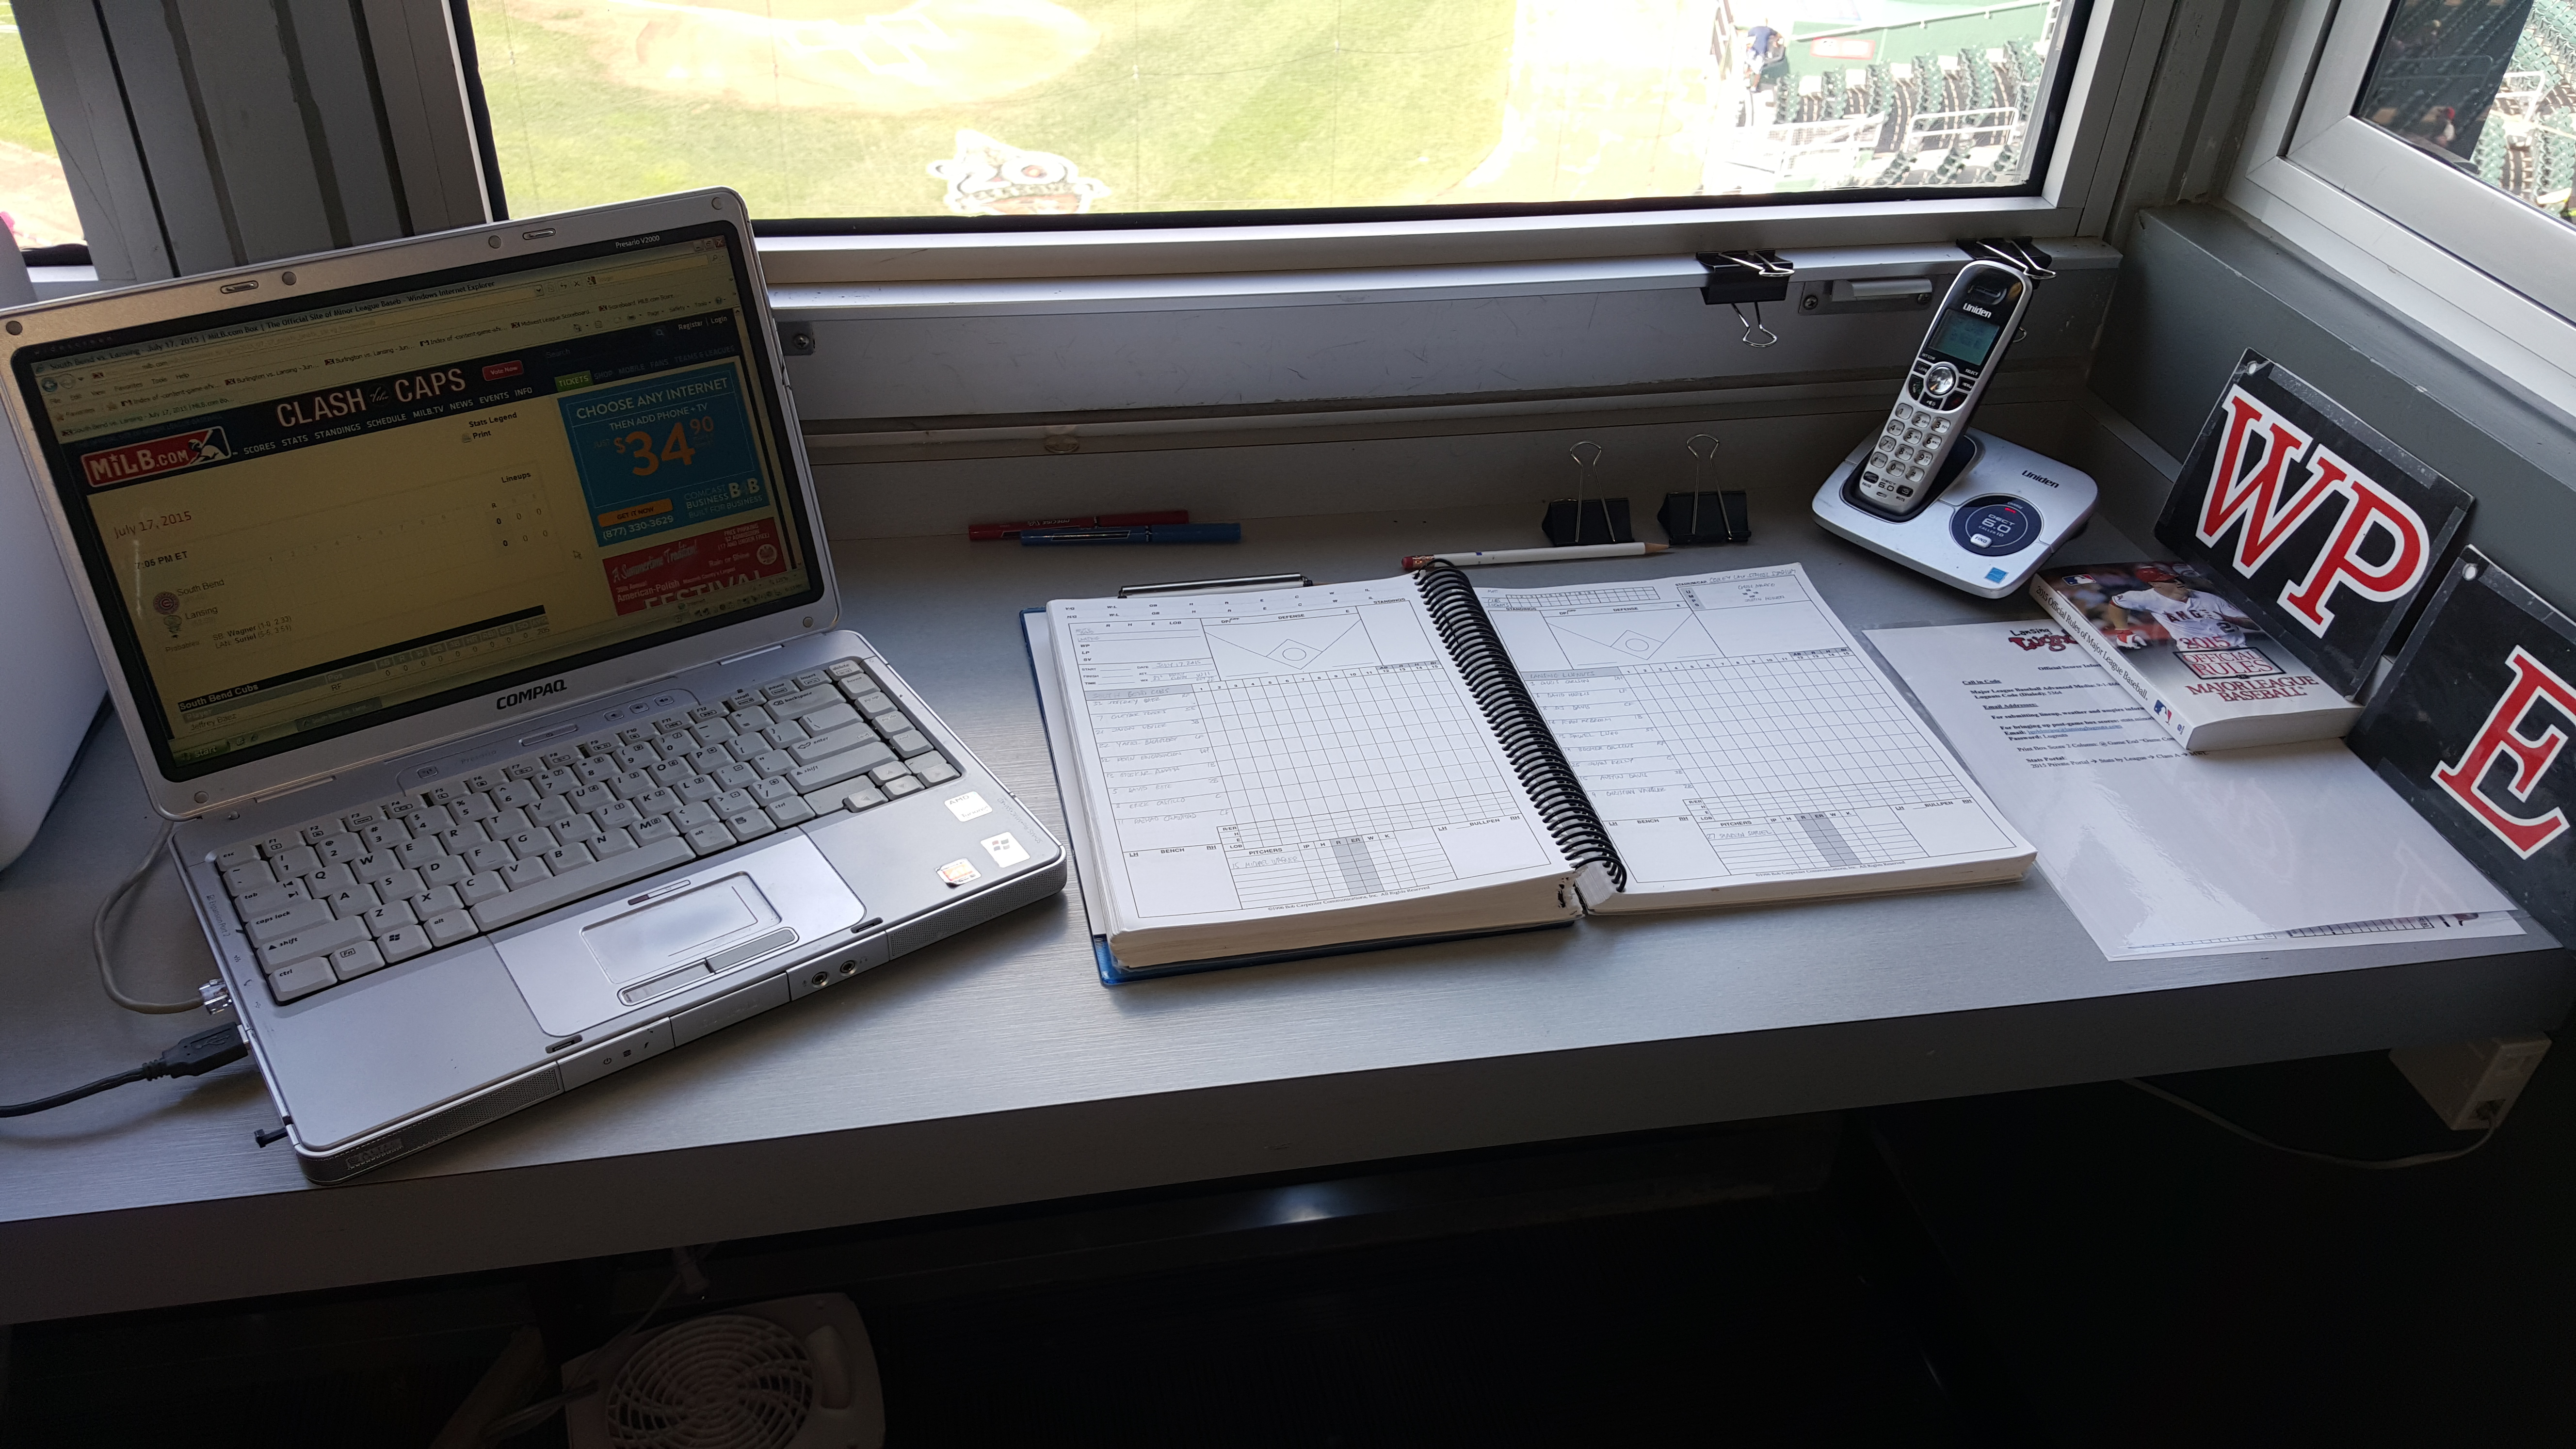 The official scorer's station at Cooley Law School Stadium in Lansing, Michigan